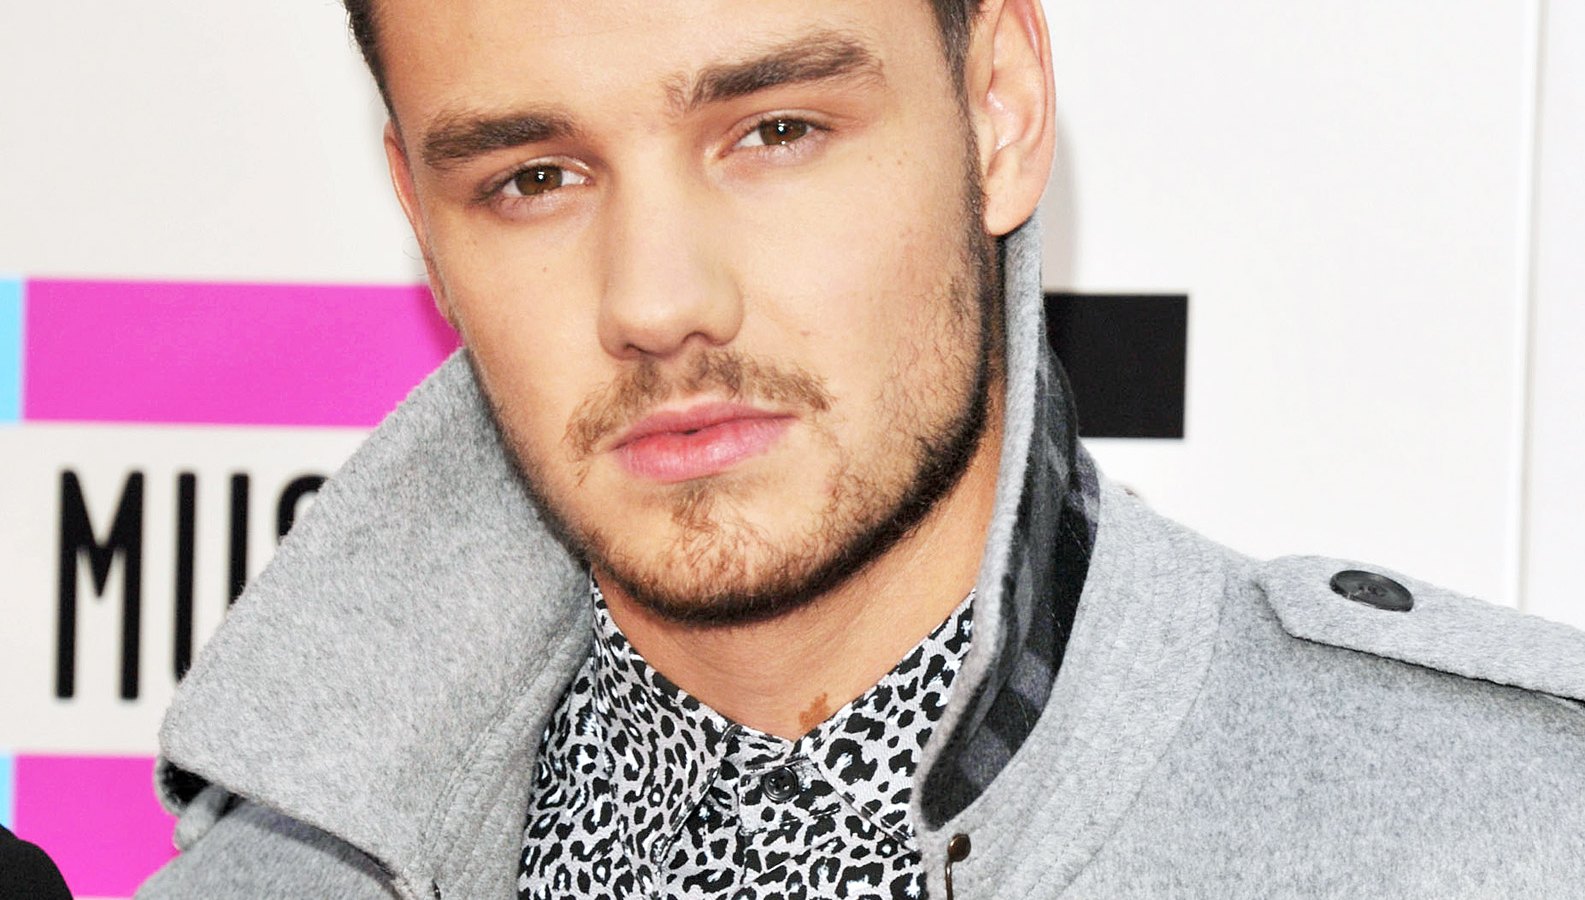 Liam Payne of One Direction at the 2013 American Music Awards